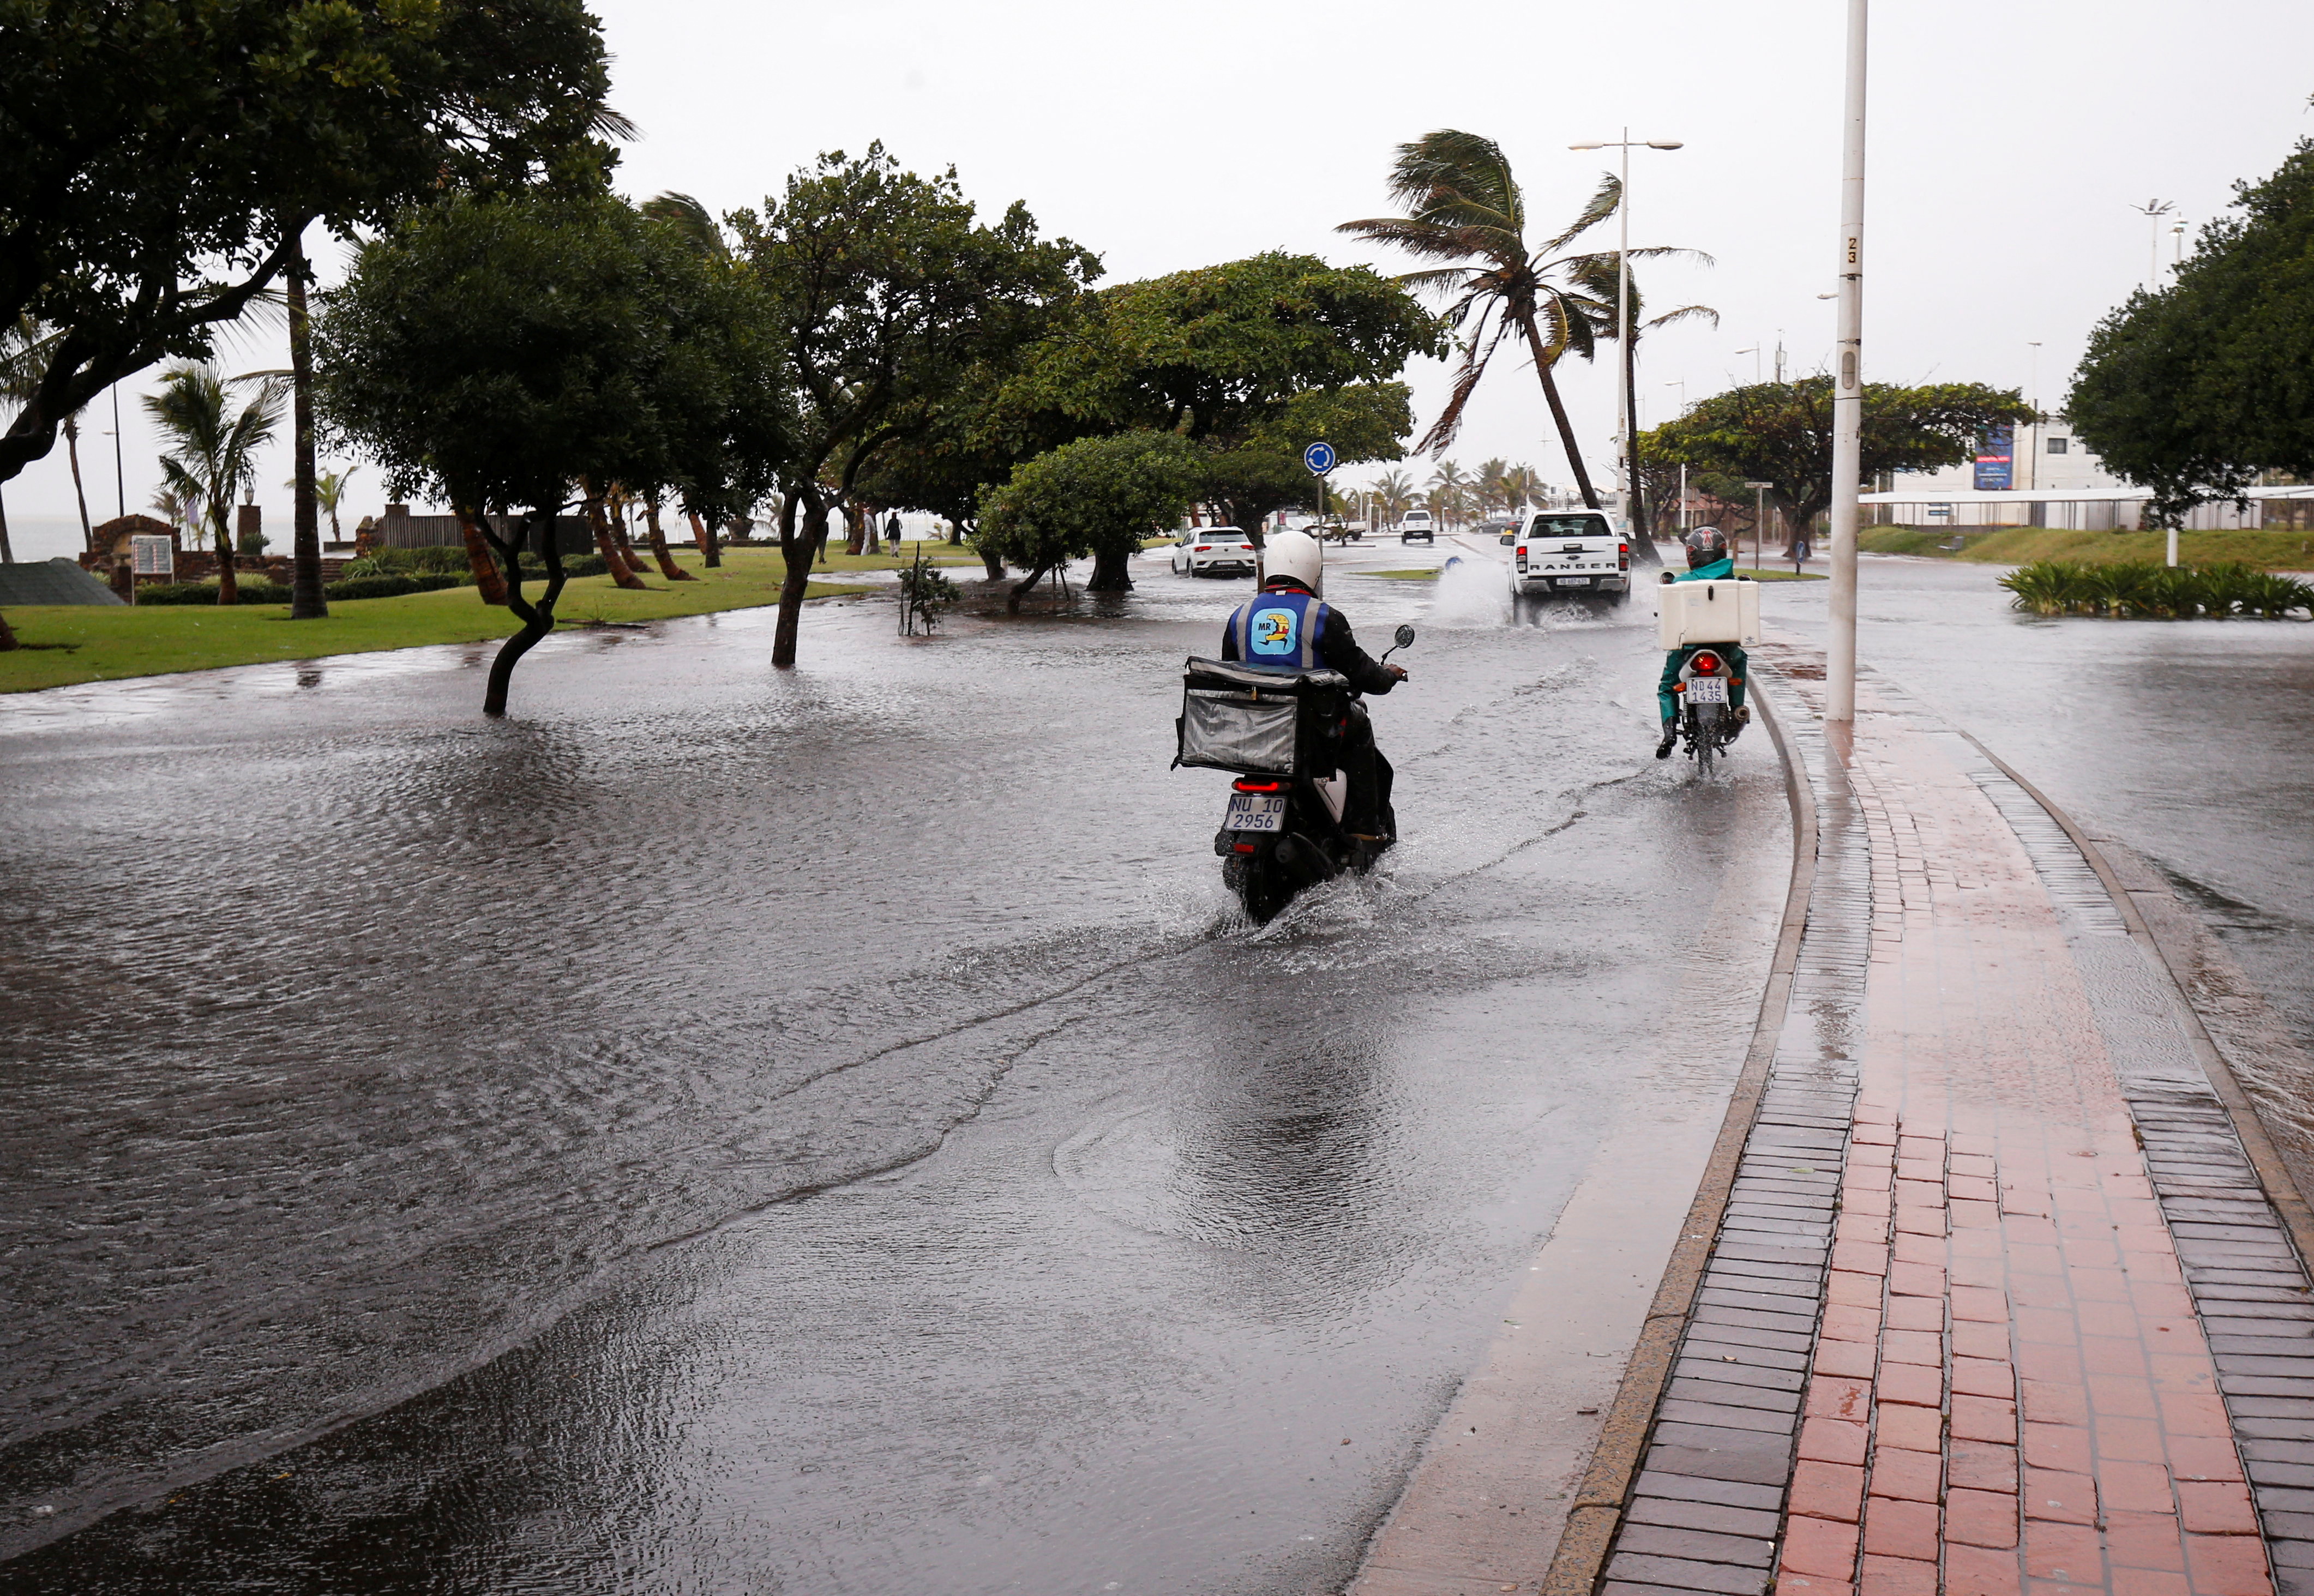 Delivery bikes ride along a waterlogged road on the beach front after heavy rains, in Durban